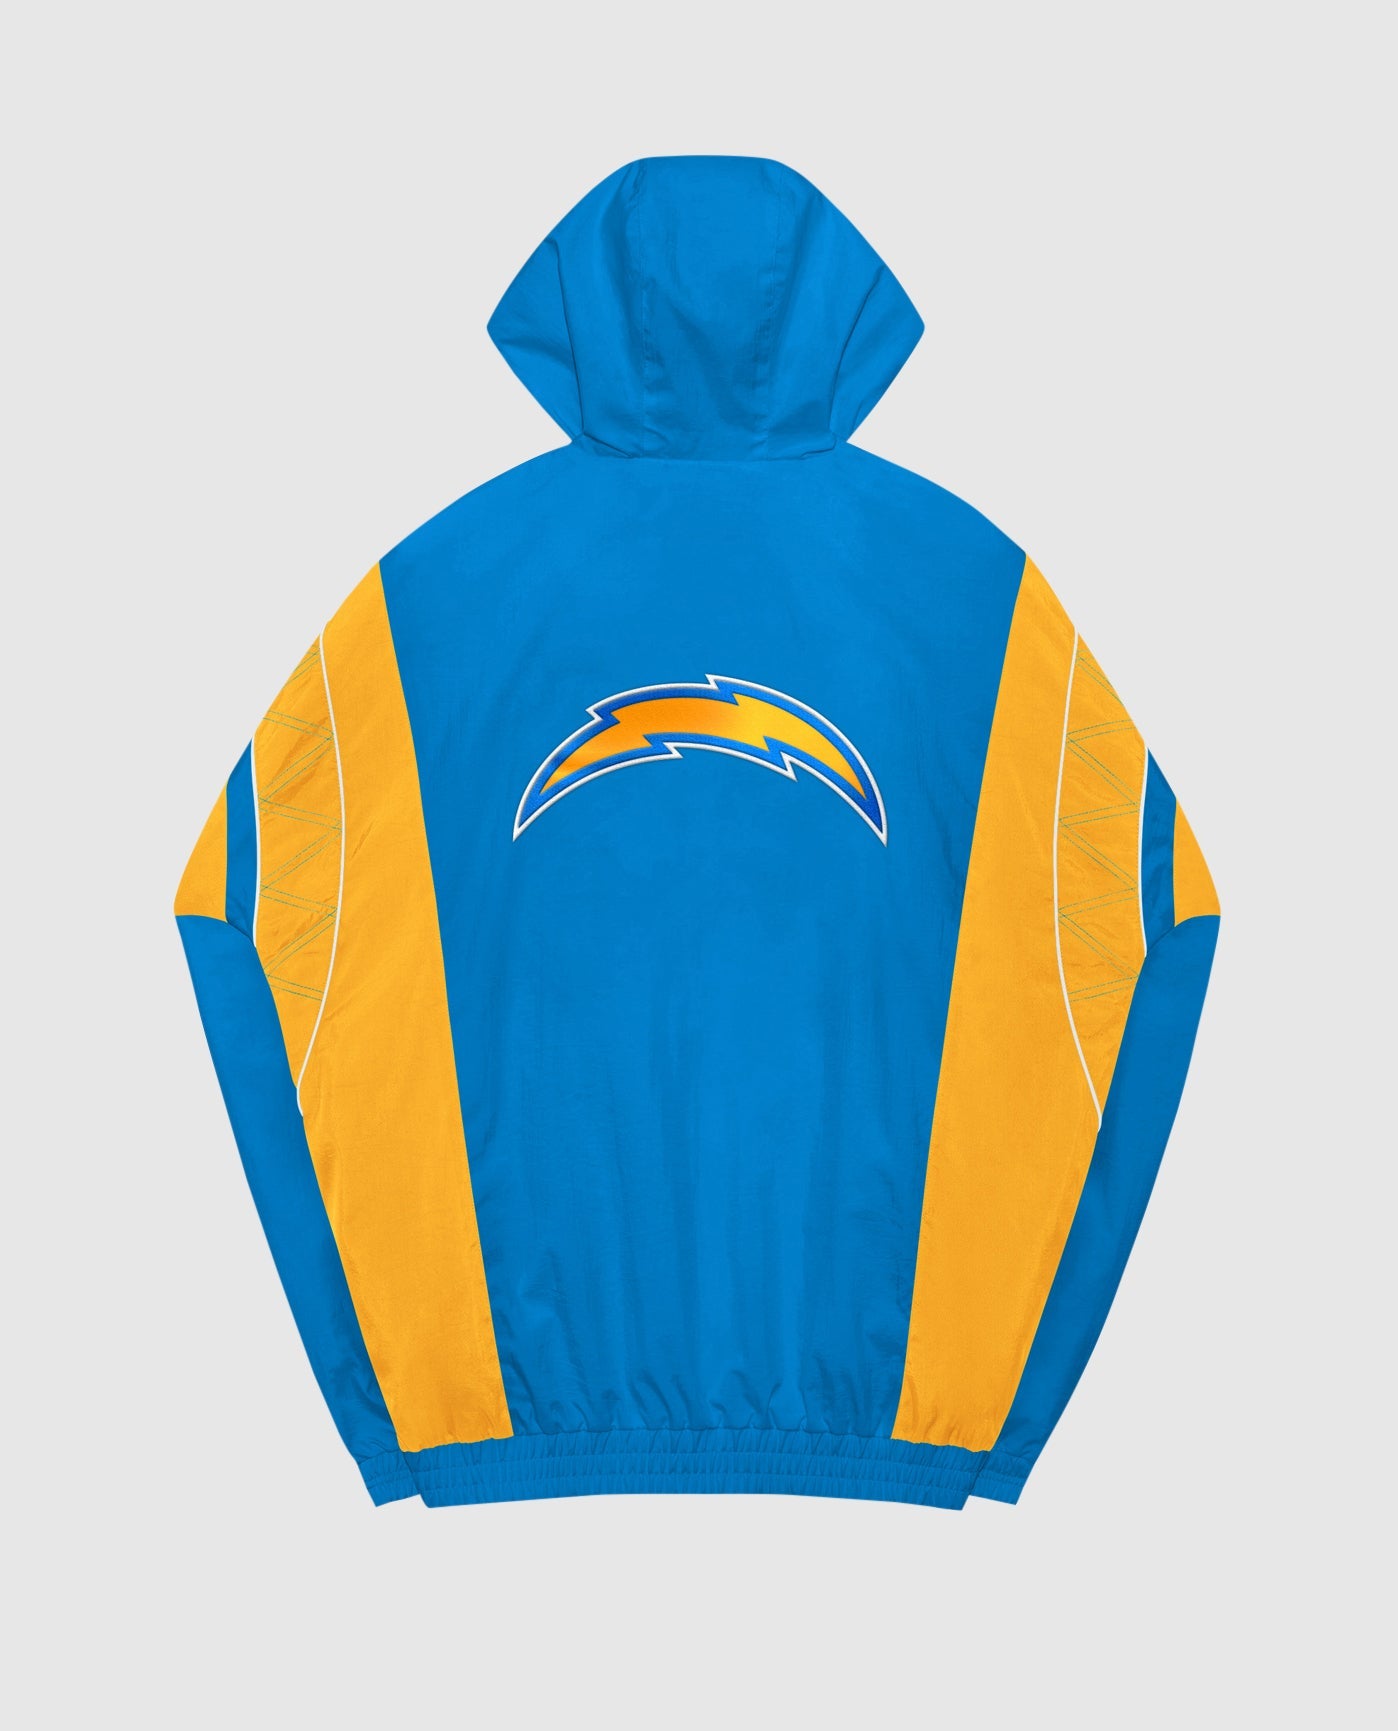 Chargers Blue